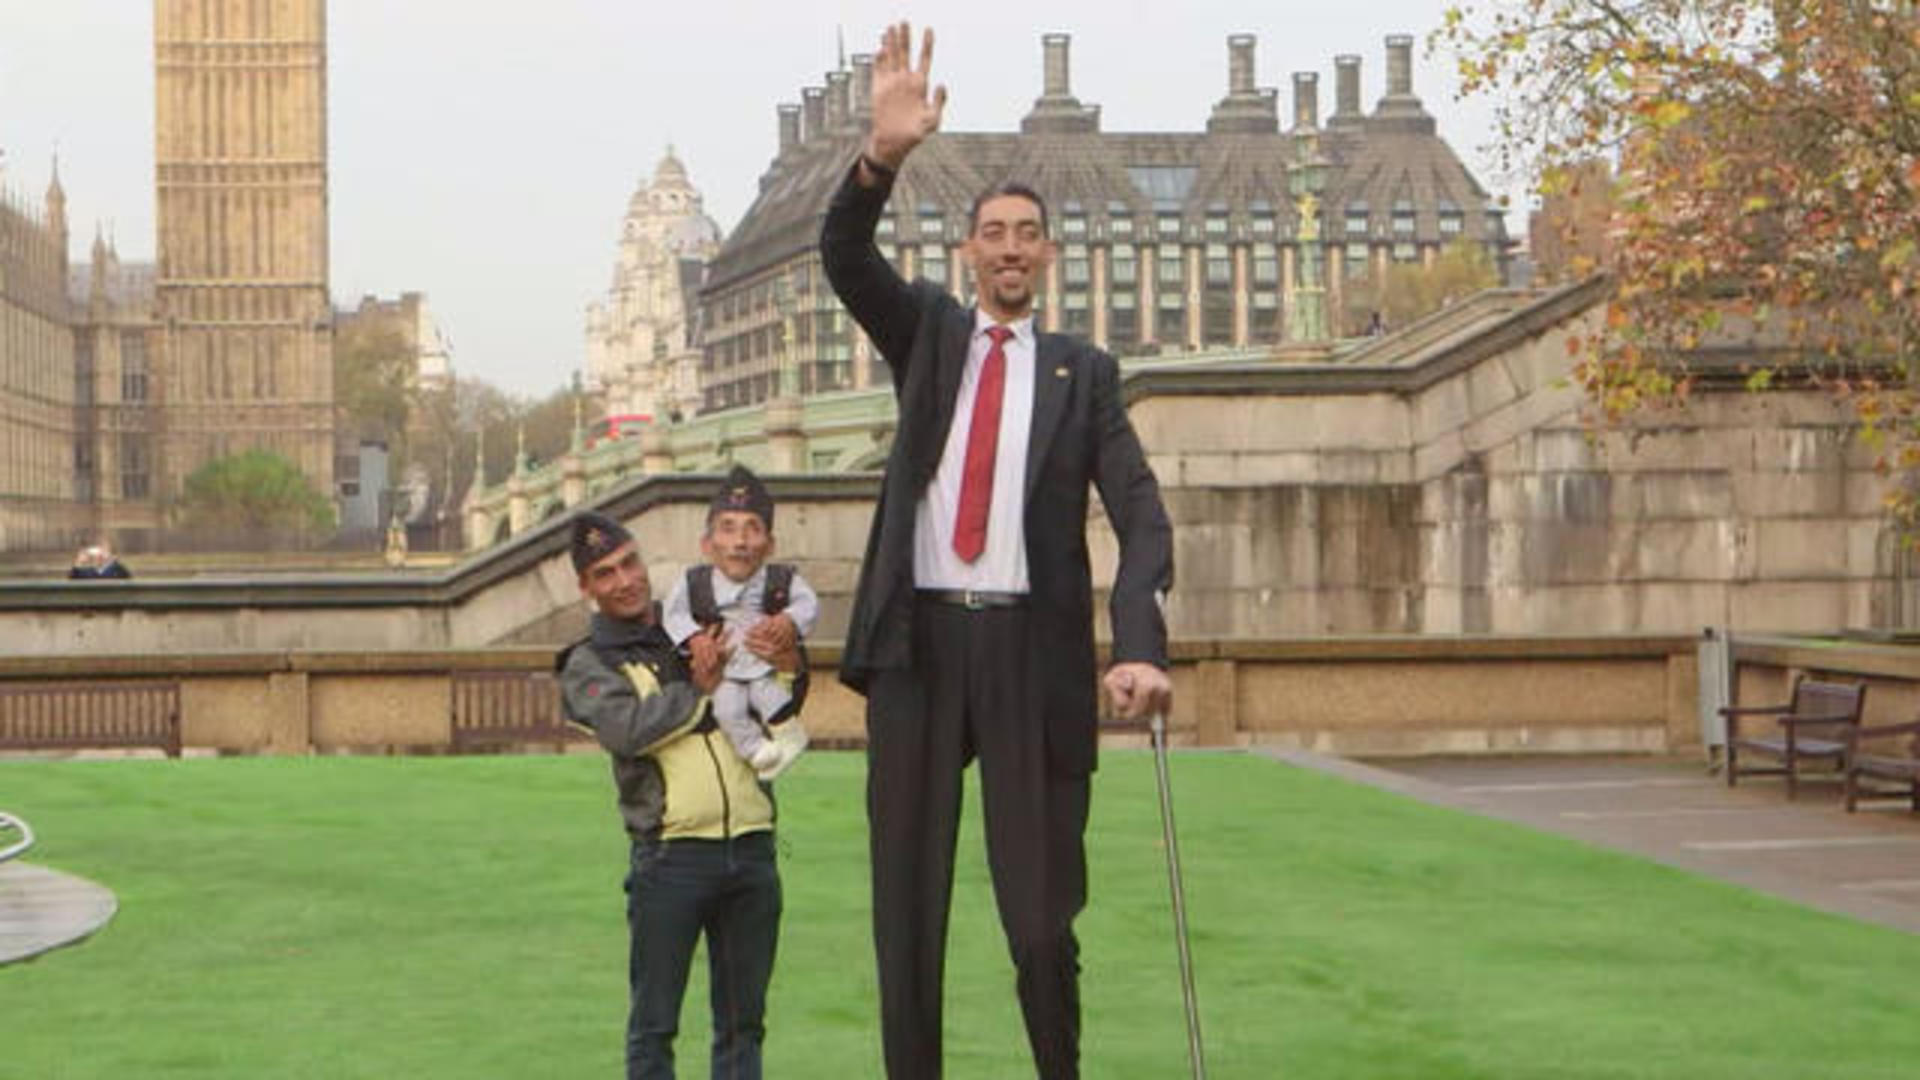 The tallest and shortest man of the world